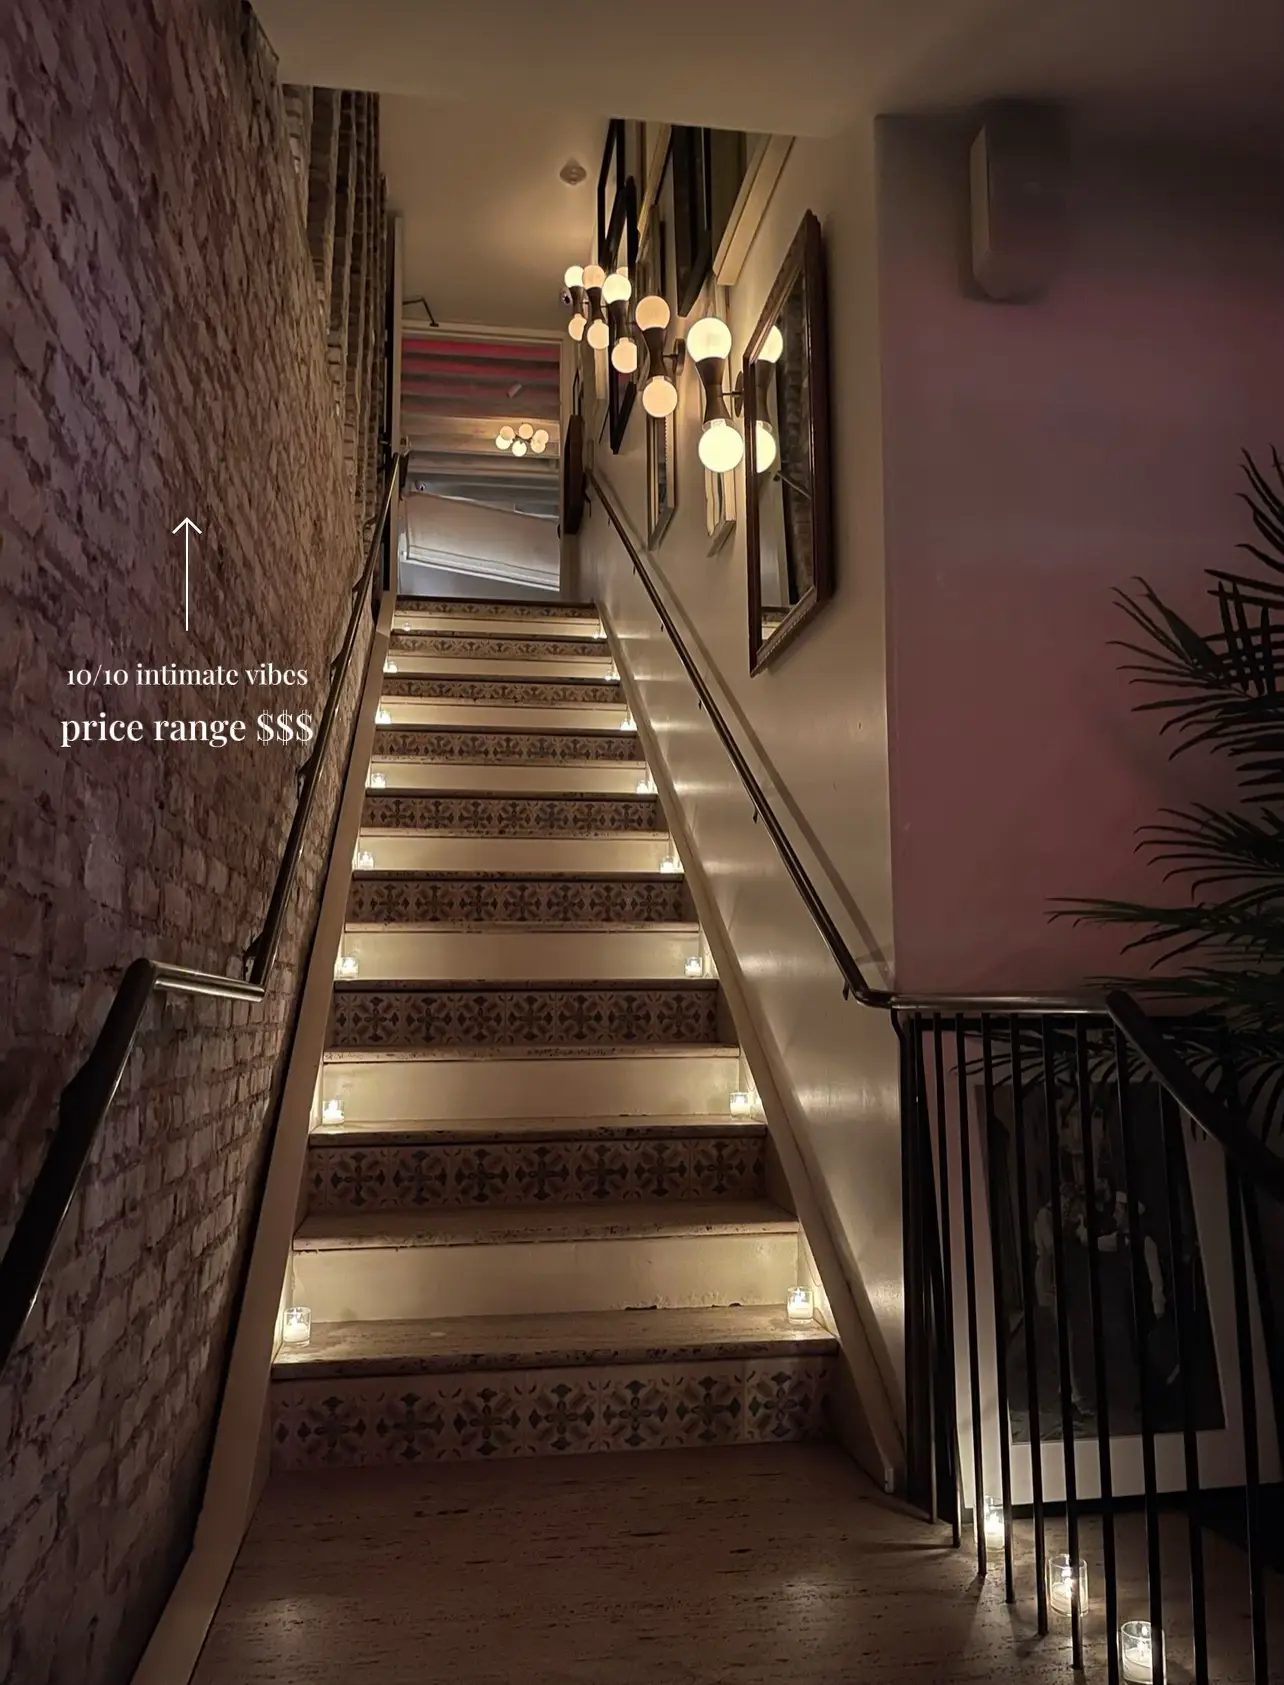  A staircase with a brick wall and a lighted railing.